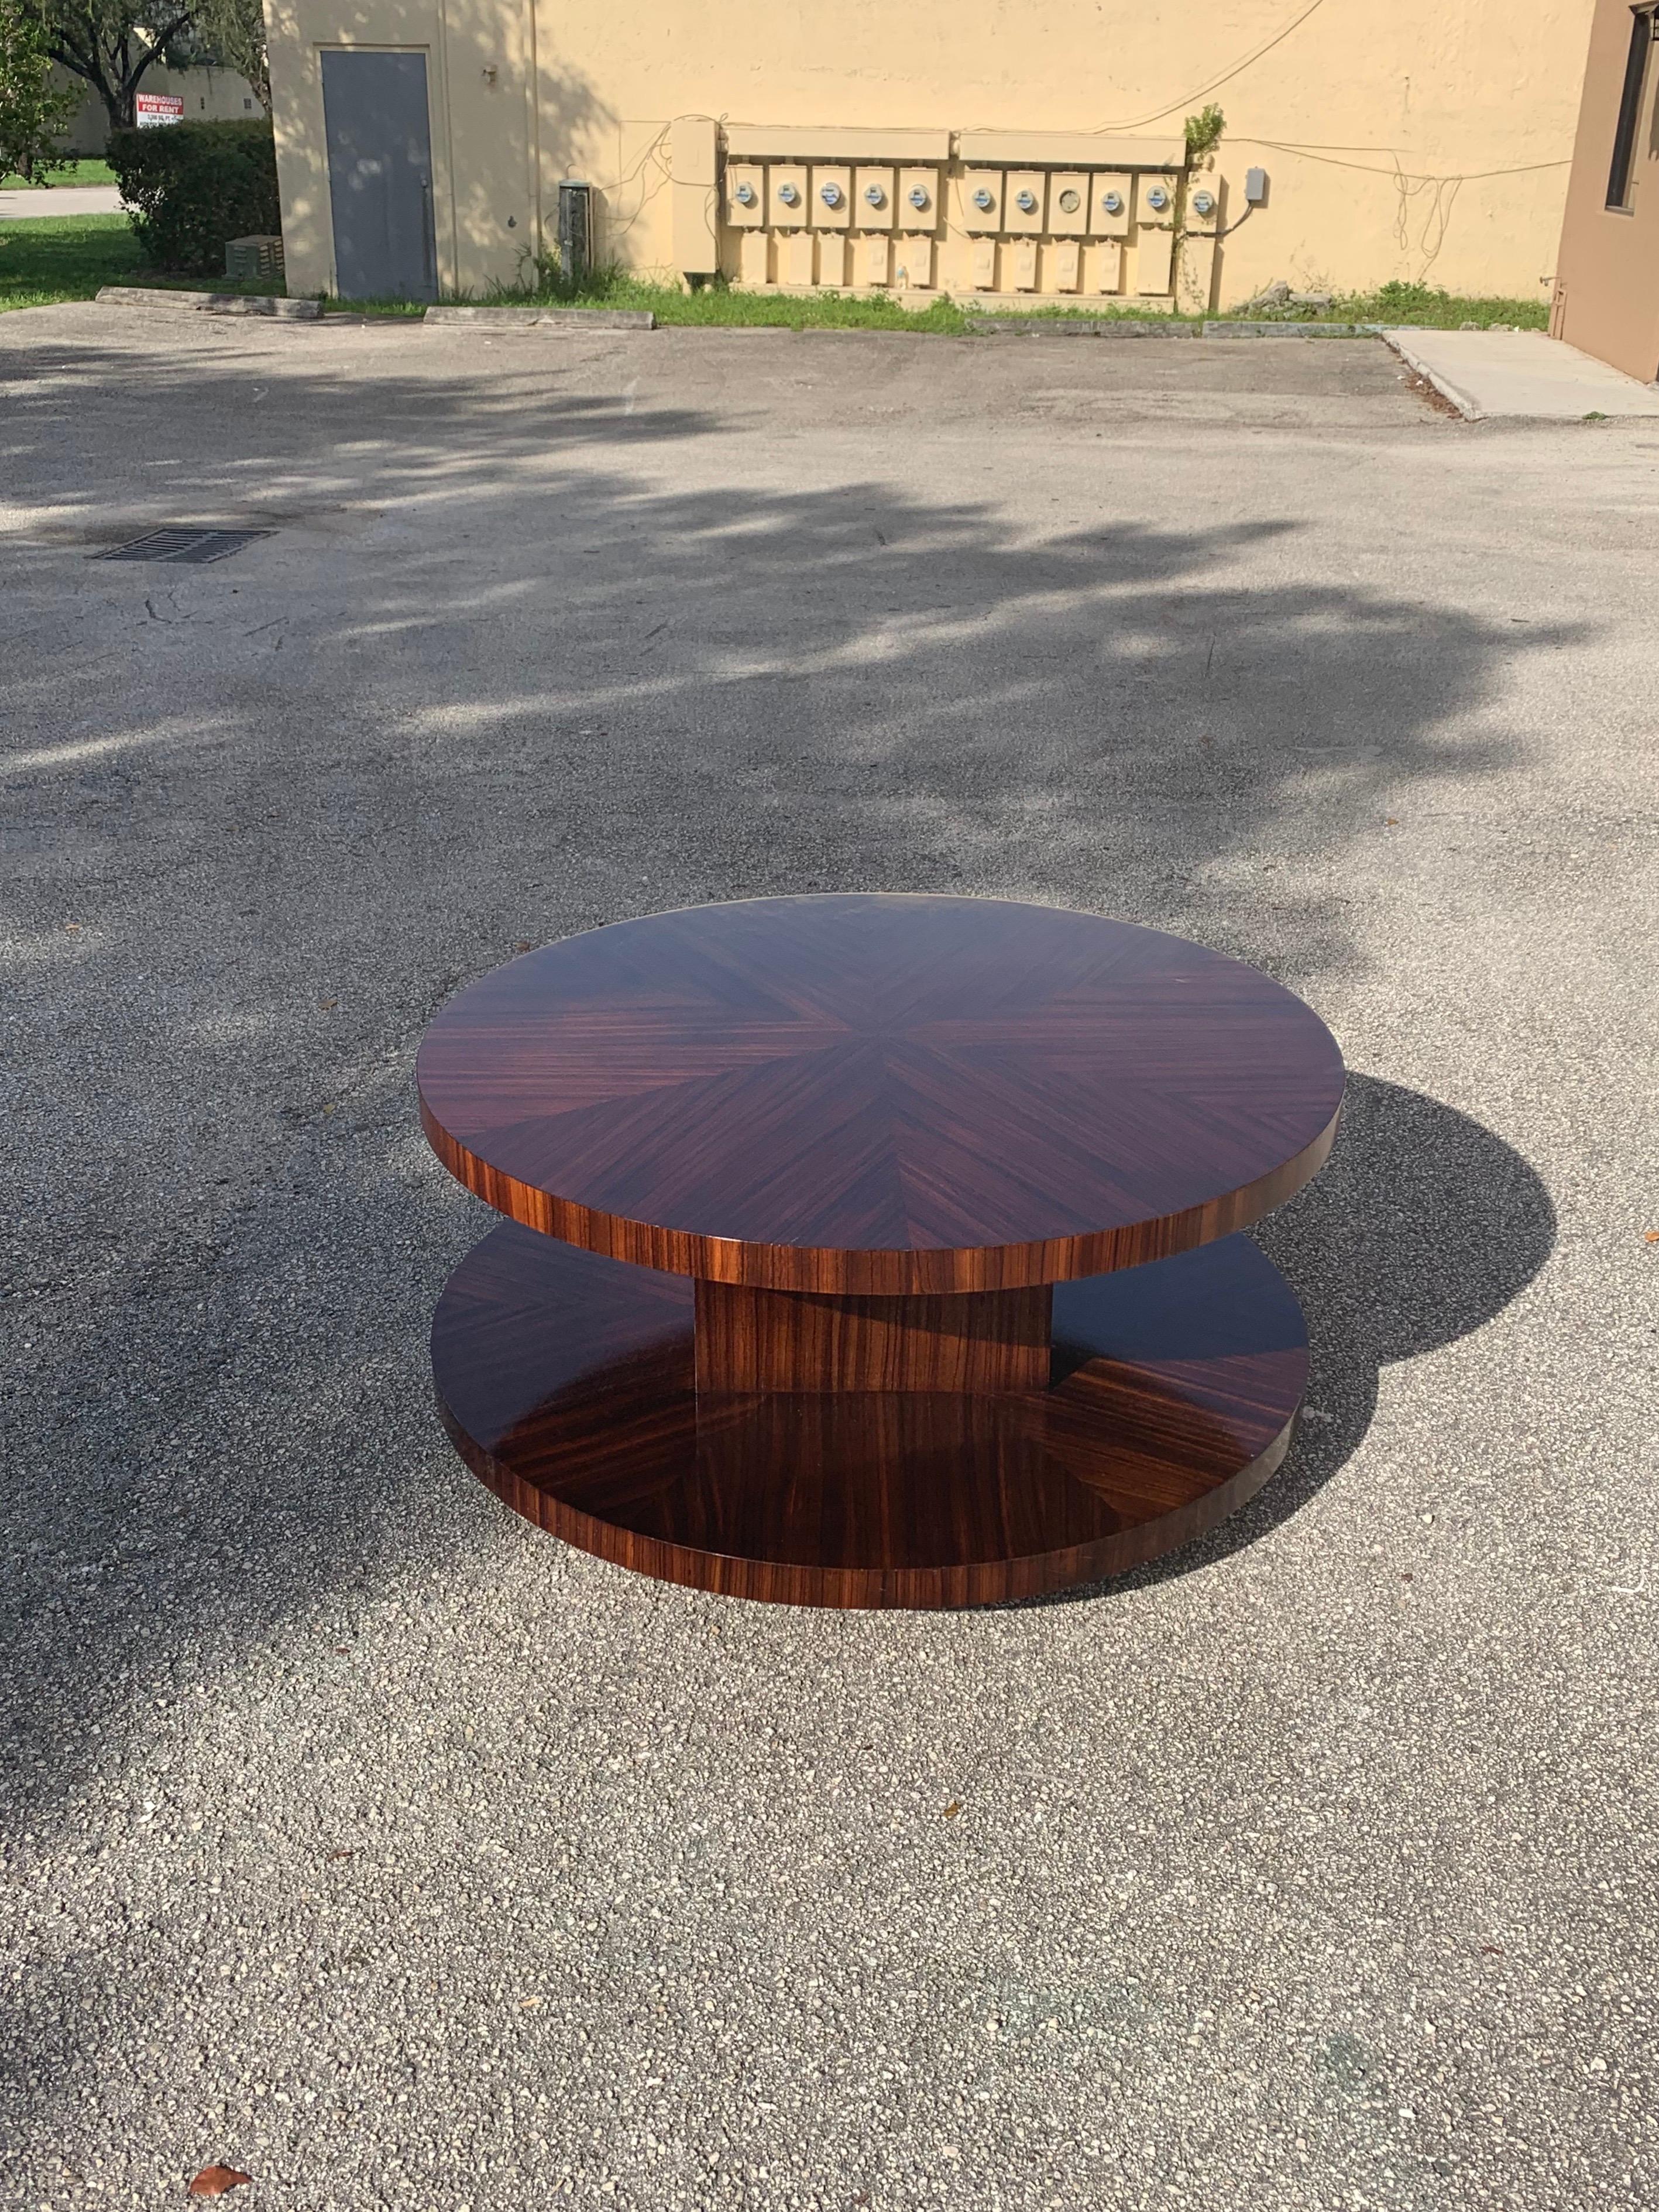 Monumental French Art Deco Macassar sunburst rotating coffee table 1940s, the round coffee table have one center legs with bottom shelf in same Macassar sunburst as top, the top of the table are rotating, this French Art Deco table are in perfect